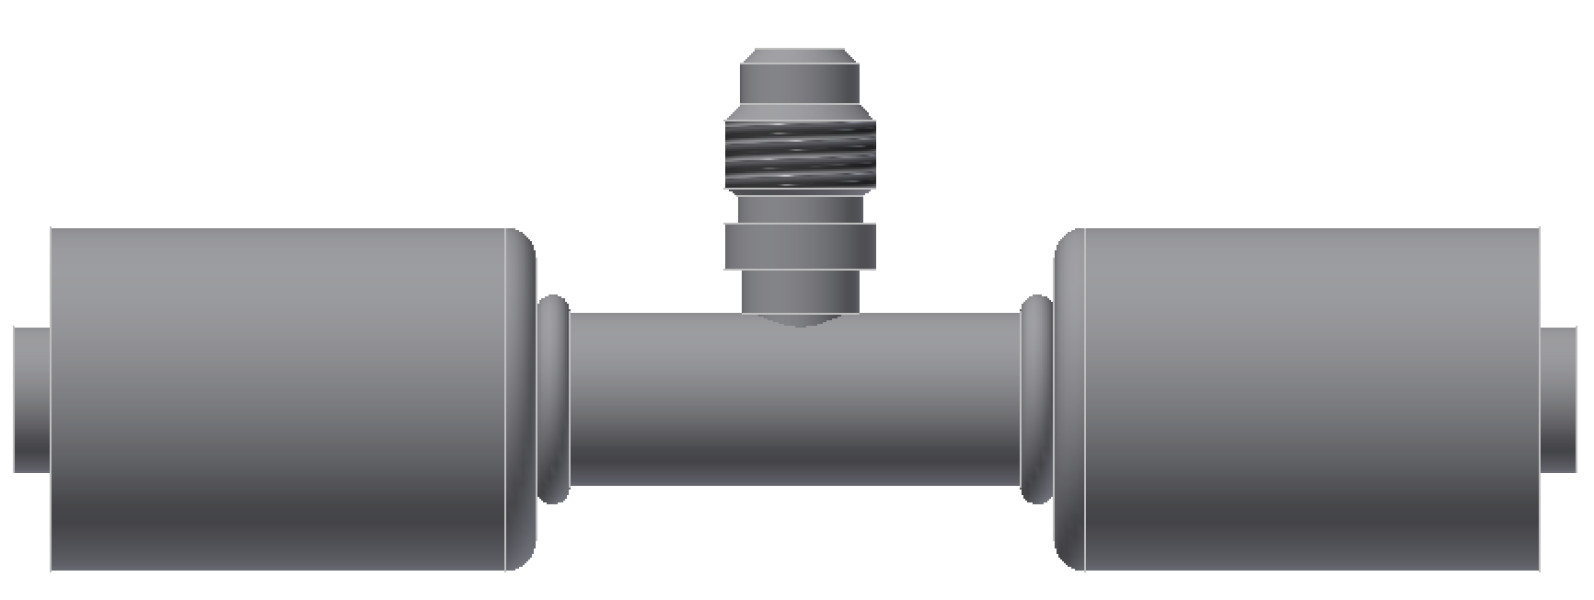 Image of A/C Refrigerant Hose Fitting from Sunair. Part number: SA-7020-12-12S